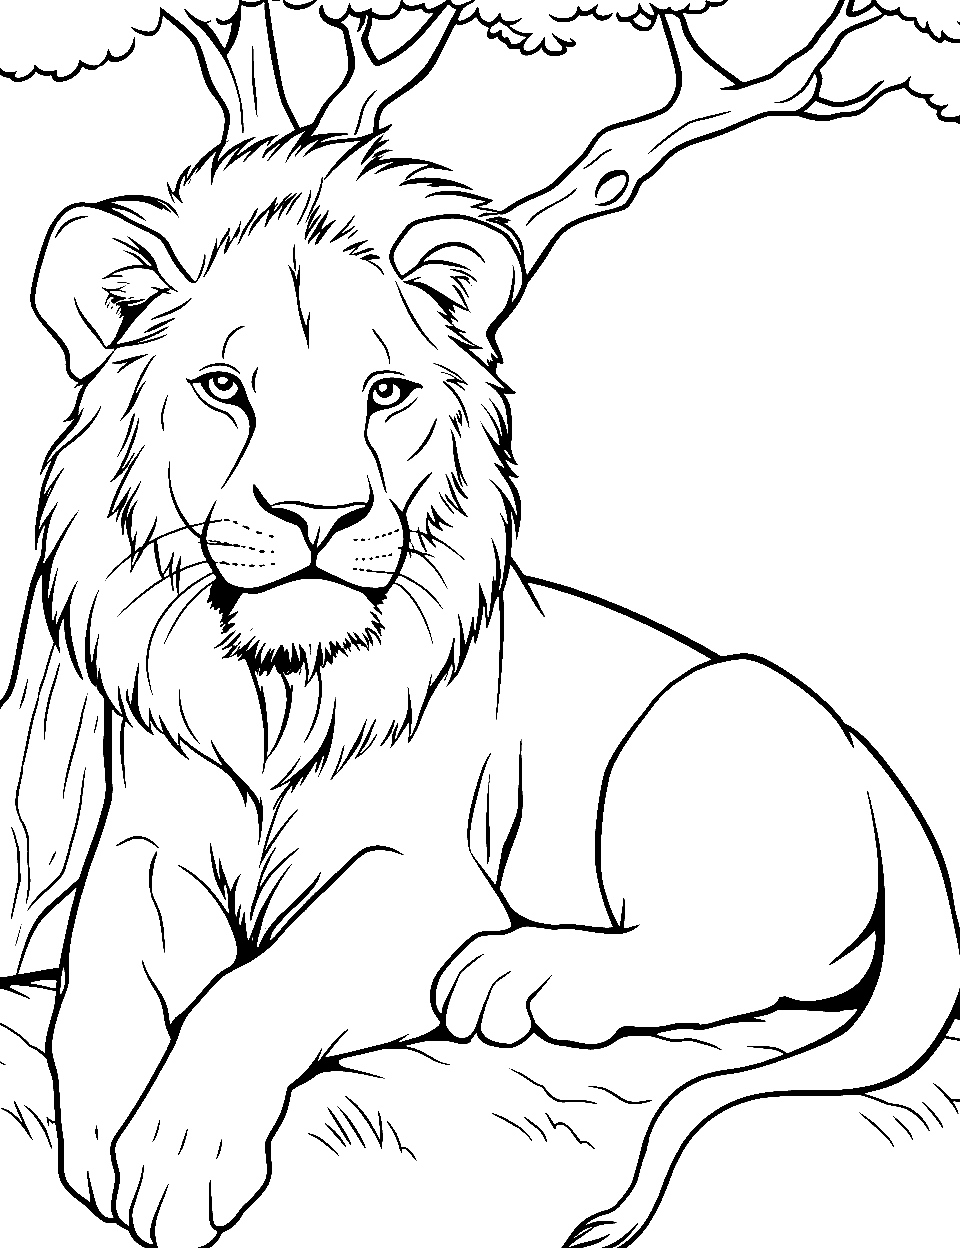 African Lion's Rest Coloring Page - A resting lion under the shade of an Acacia tree.